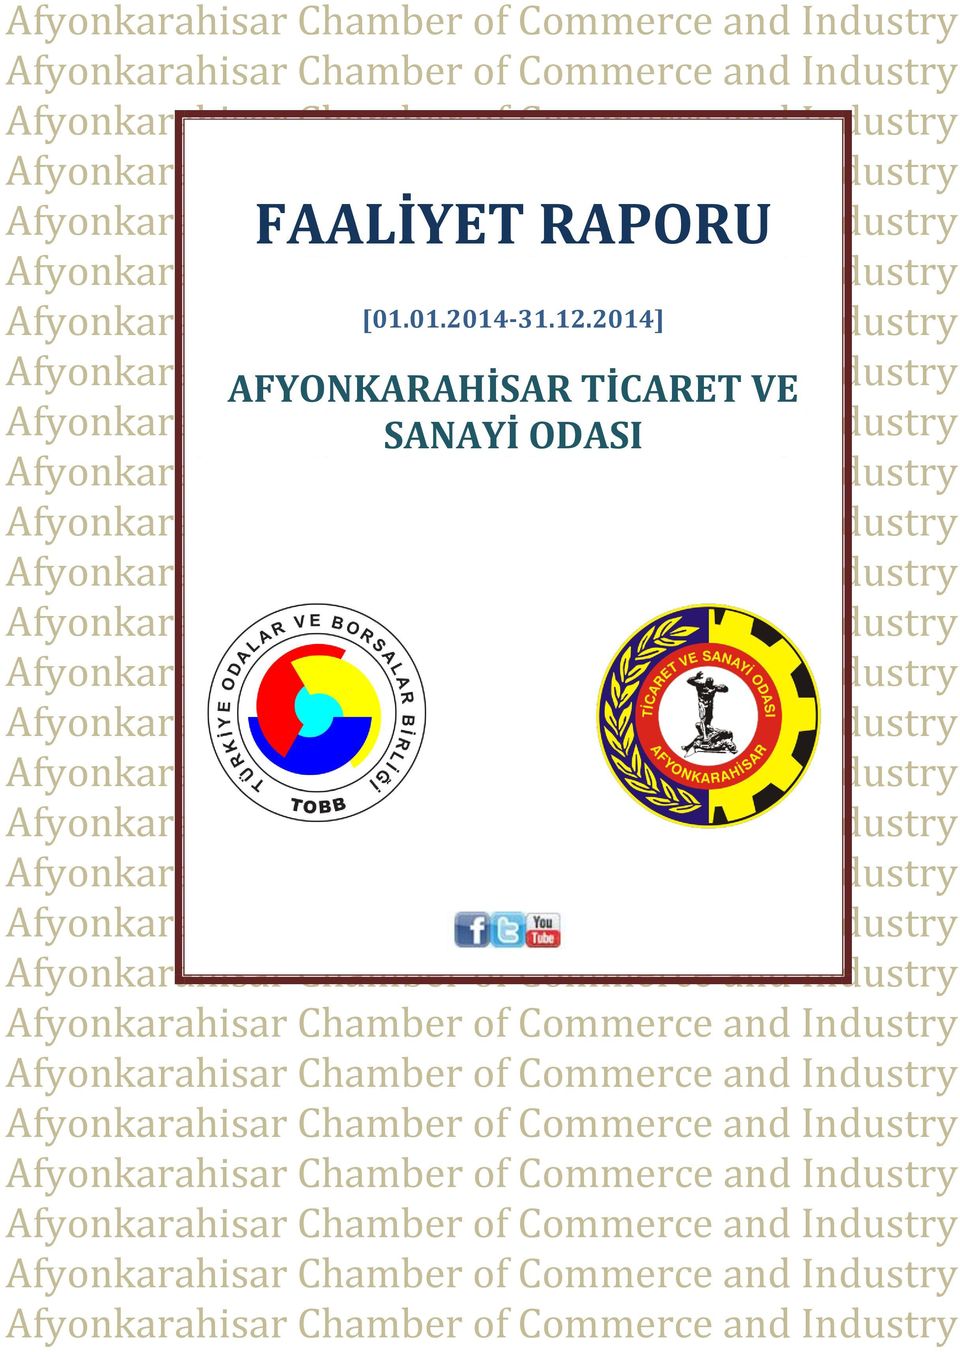 2014] of Commerce and Industry Afyonkarahisar AFYONKARAHİSAR Chamber of Commerce TİCARET and VE Industry Afyonkarahisar Chamber SANAYİ of Commerce ODASI and Industry     Afyonkarahisar Chamber of